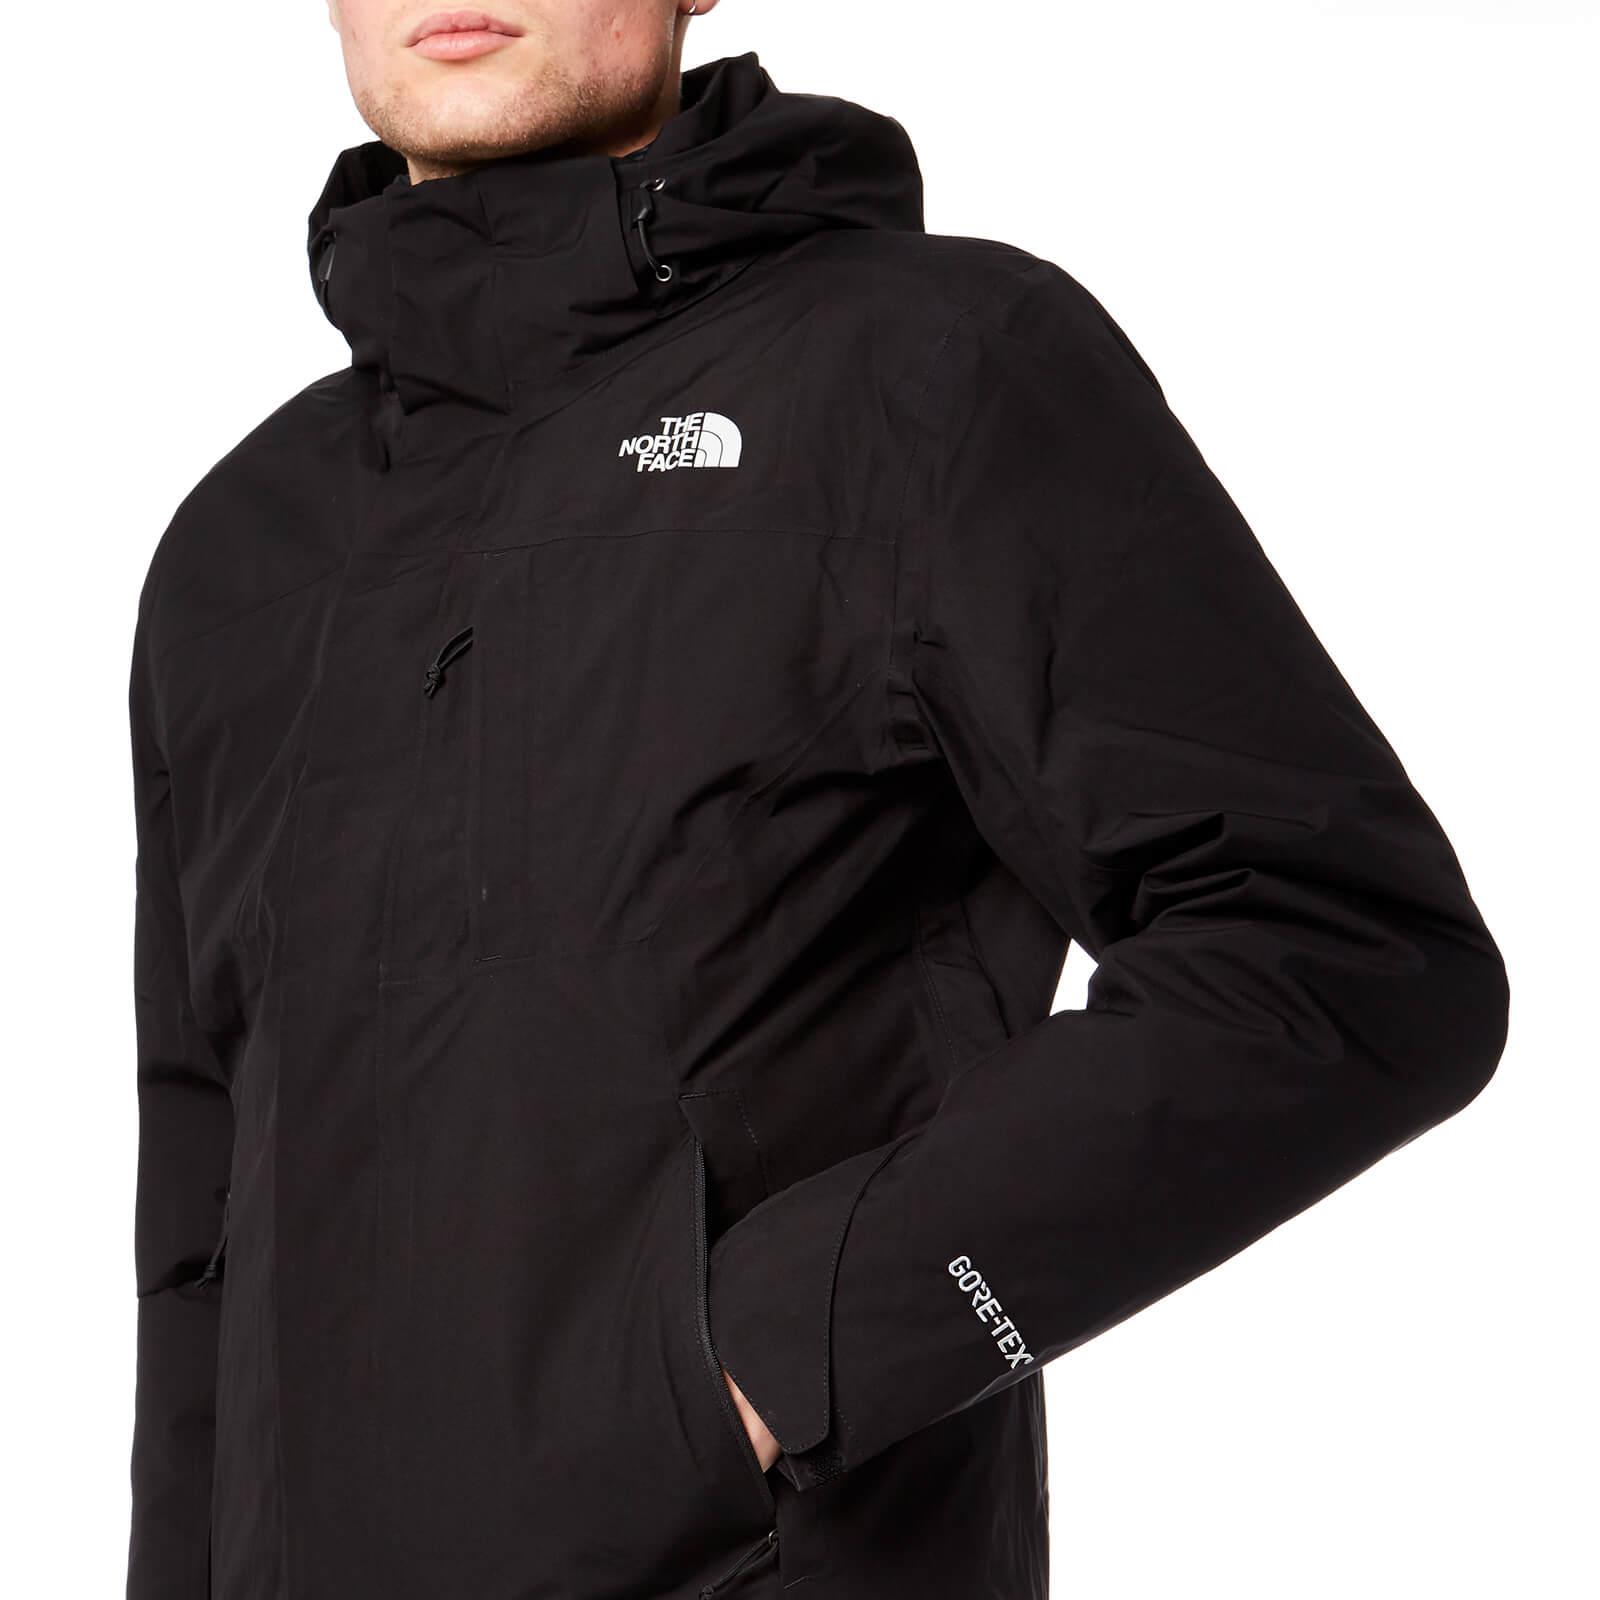 The North Face Mountain Light Triclimate® Jacket in Black for Men - Lyst